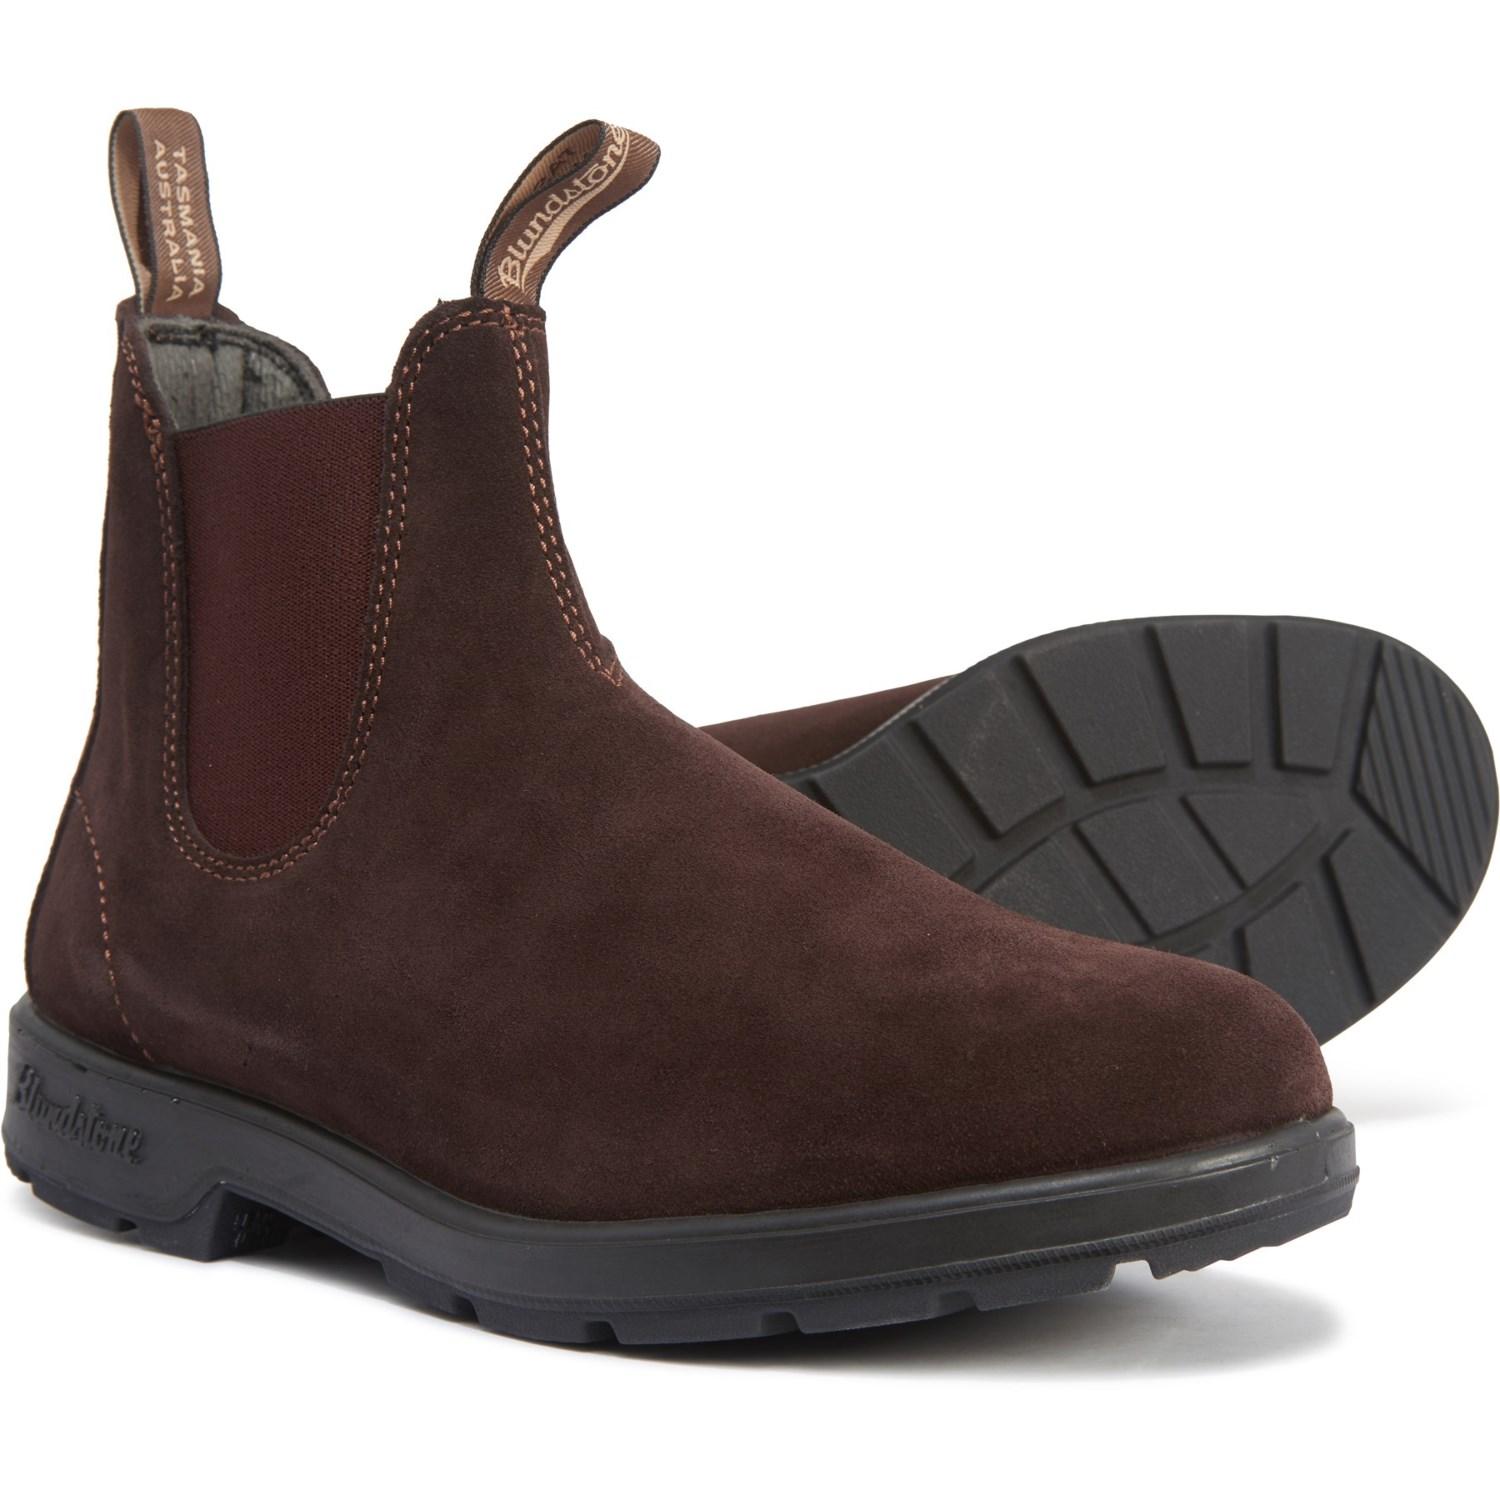 Blundstone 1458 Suede Chelsea Boots in Brown Suede (Brown) for Men - Lyst